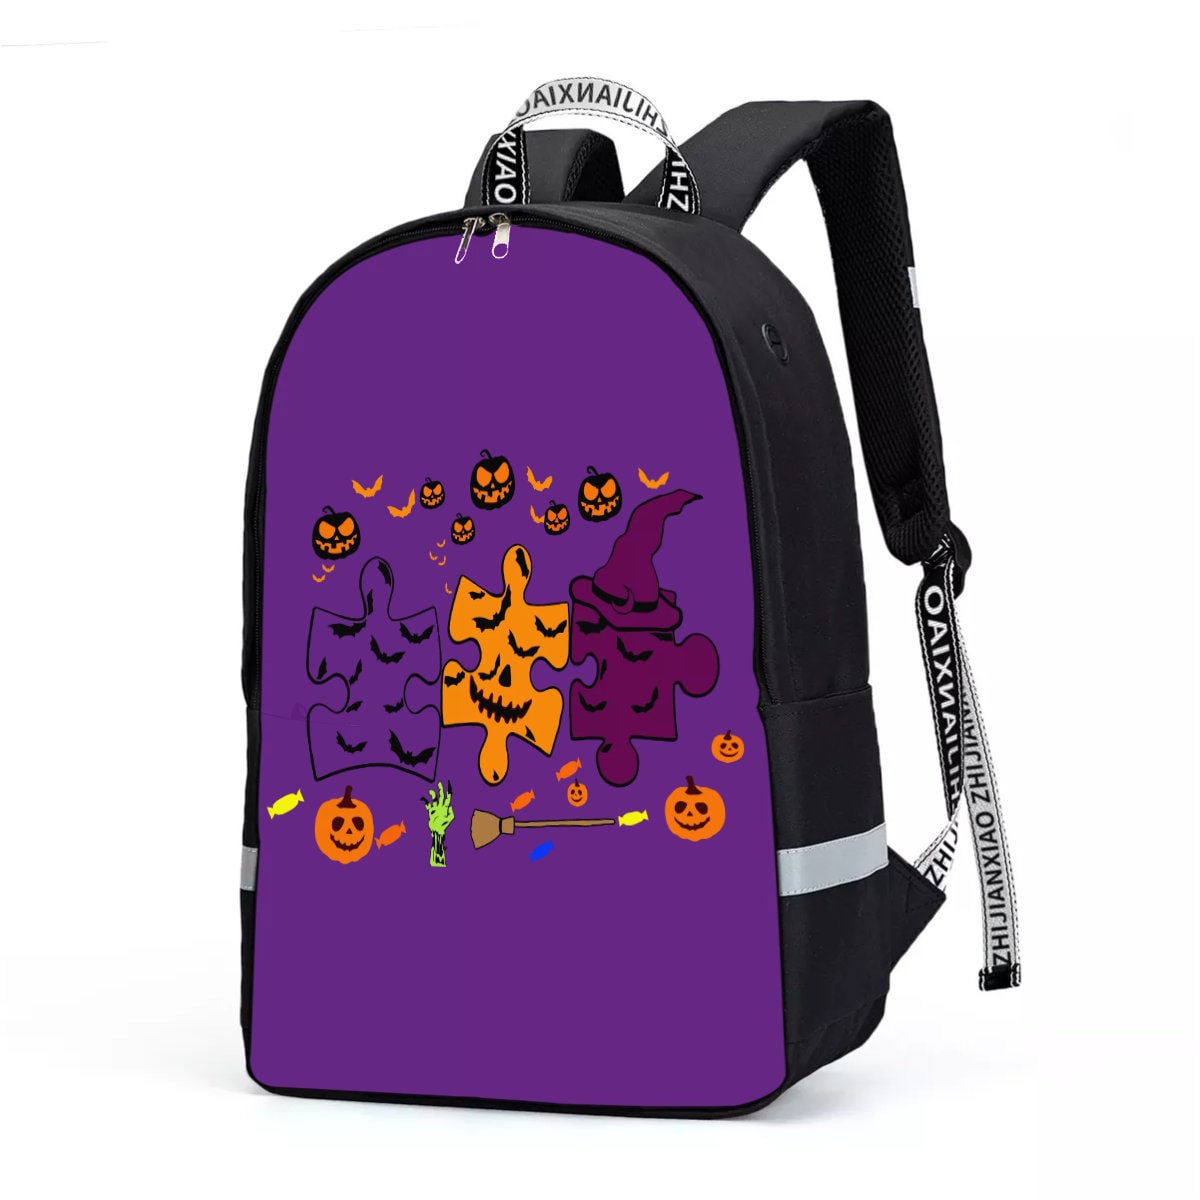 Dare to be Yourself Autism Awareness Backpack With Reflective Bar - Chloe Lambertin